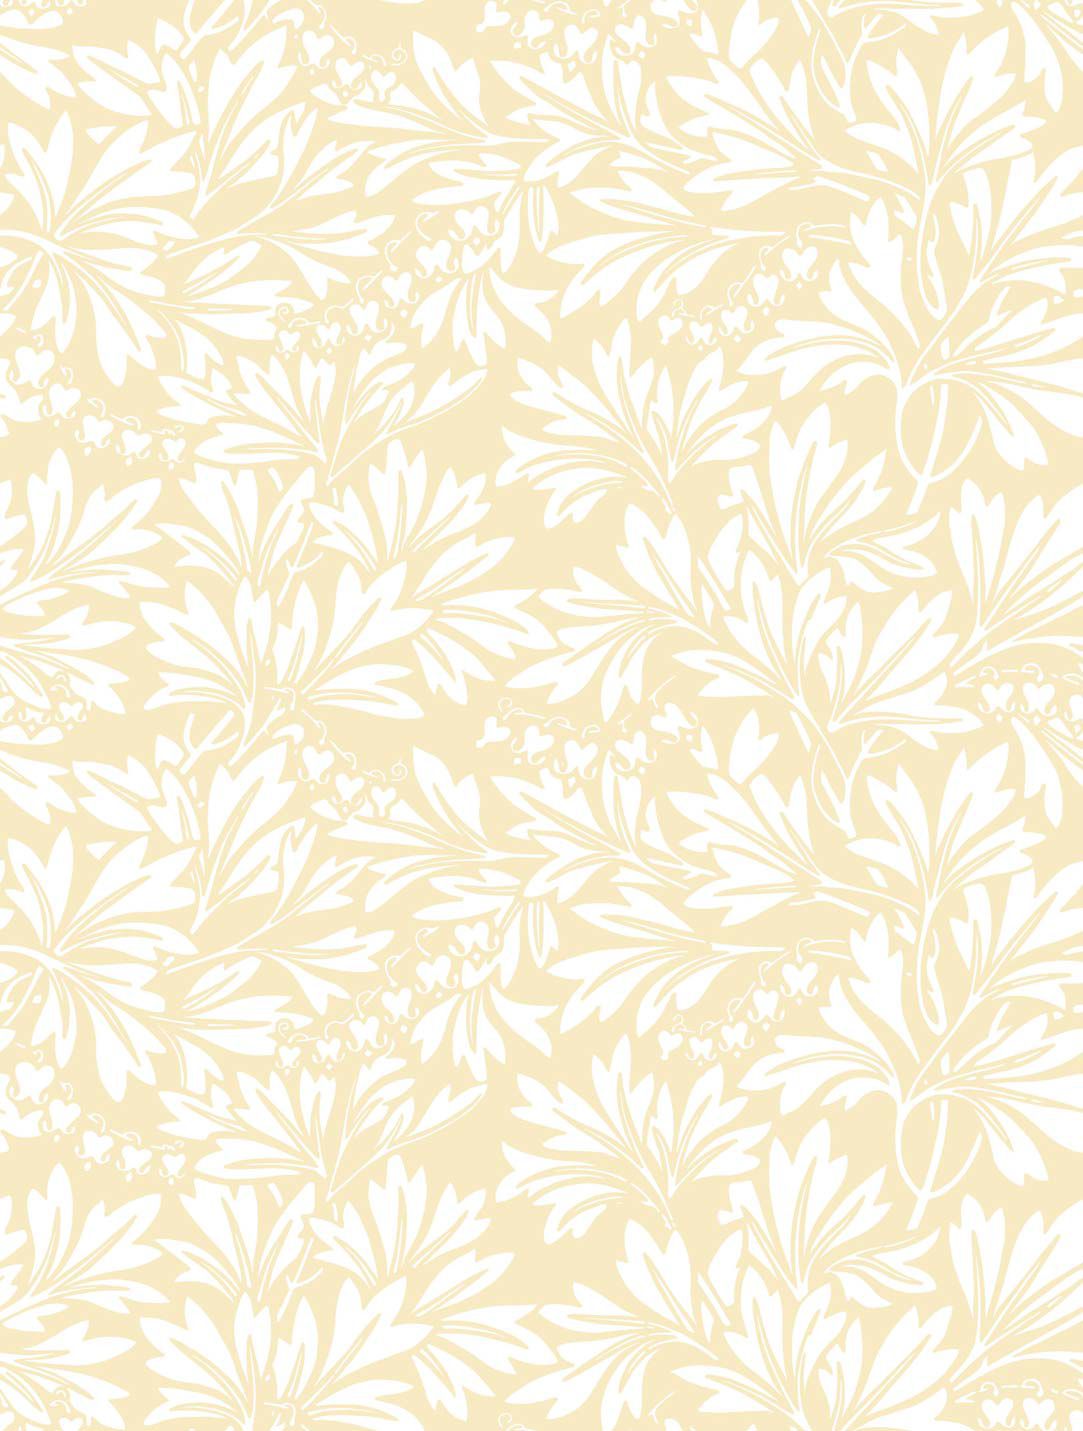 Nature pattern wallpaper / paper / traditional - ARCHIVE